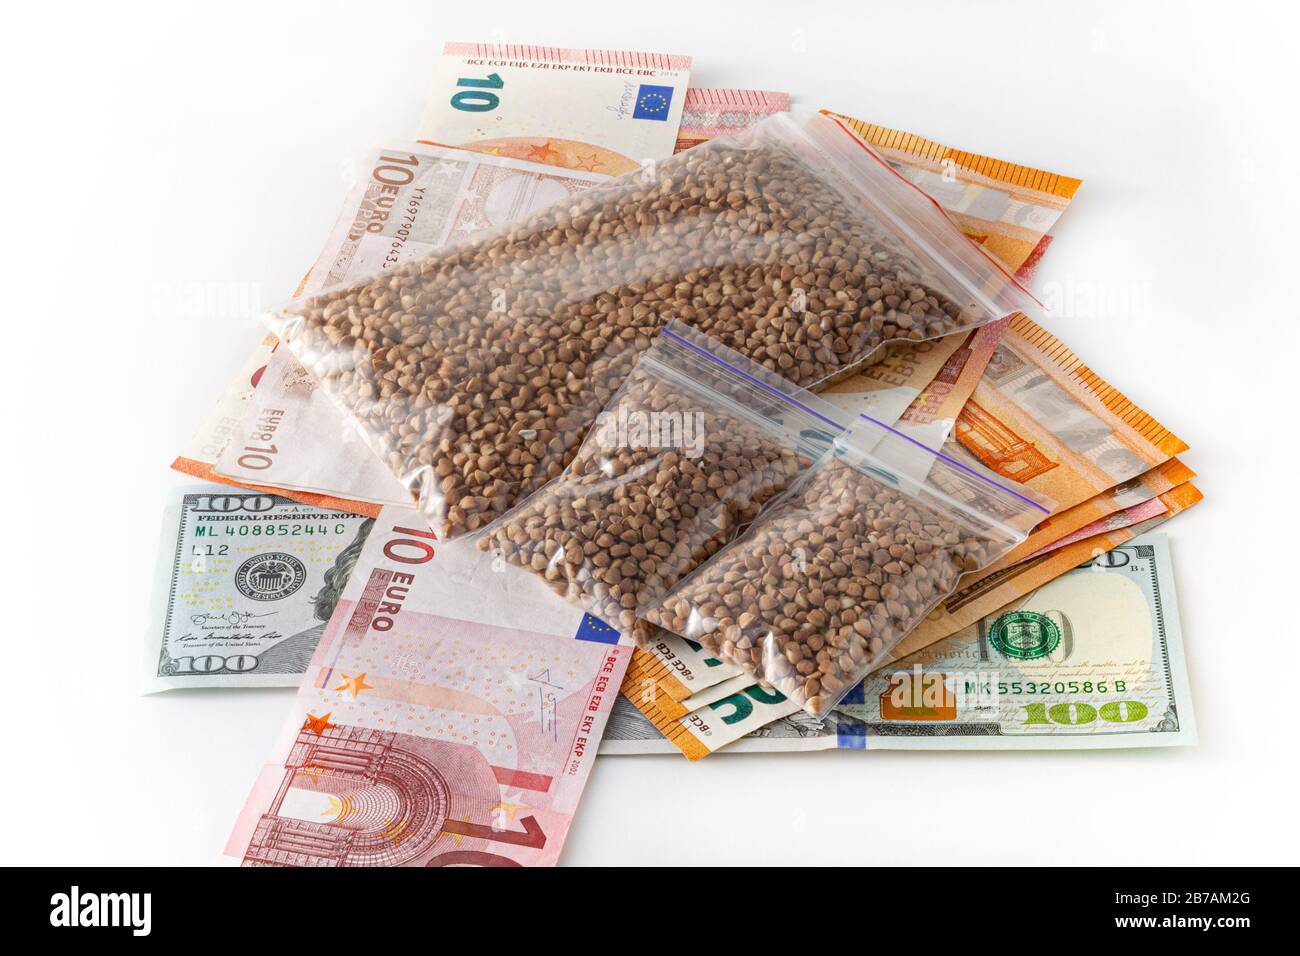 Raw buckwheat groats in small transparent plastic bags, small dose, expensive, a lot of euro money. on white background. Crisis concept Stock Photo